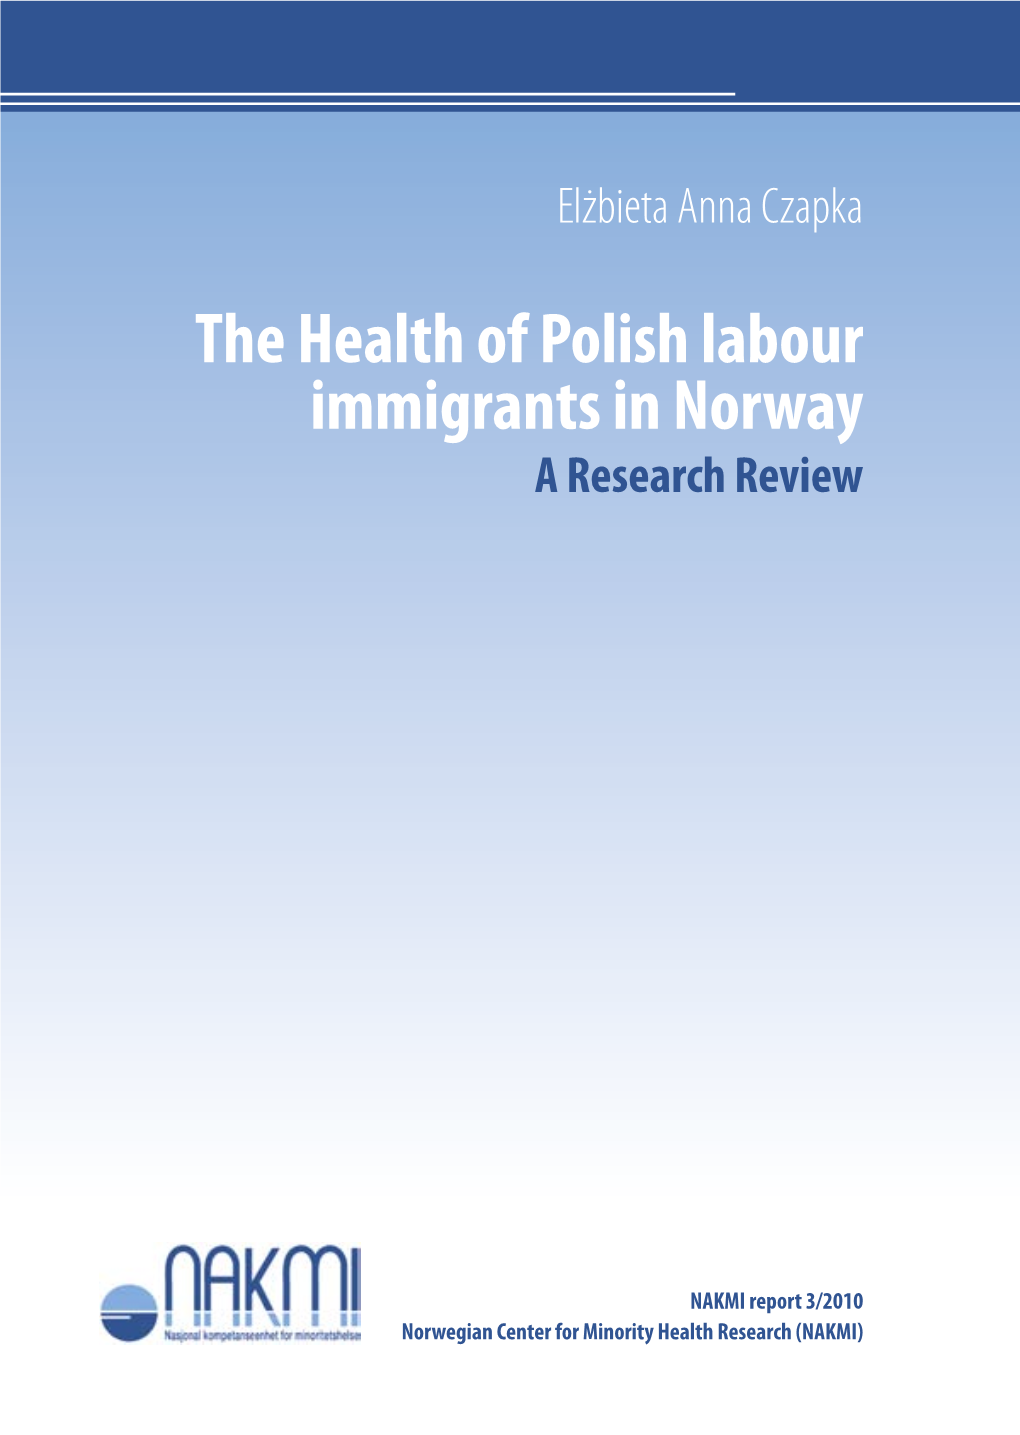 The Health of Polish Labour Immigrants in Norway a Research Review